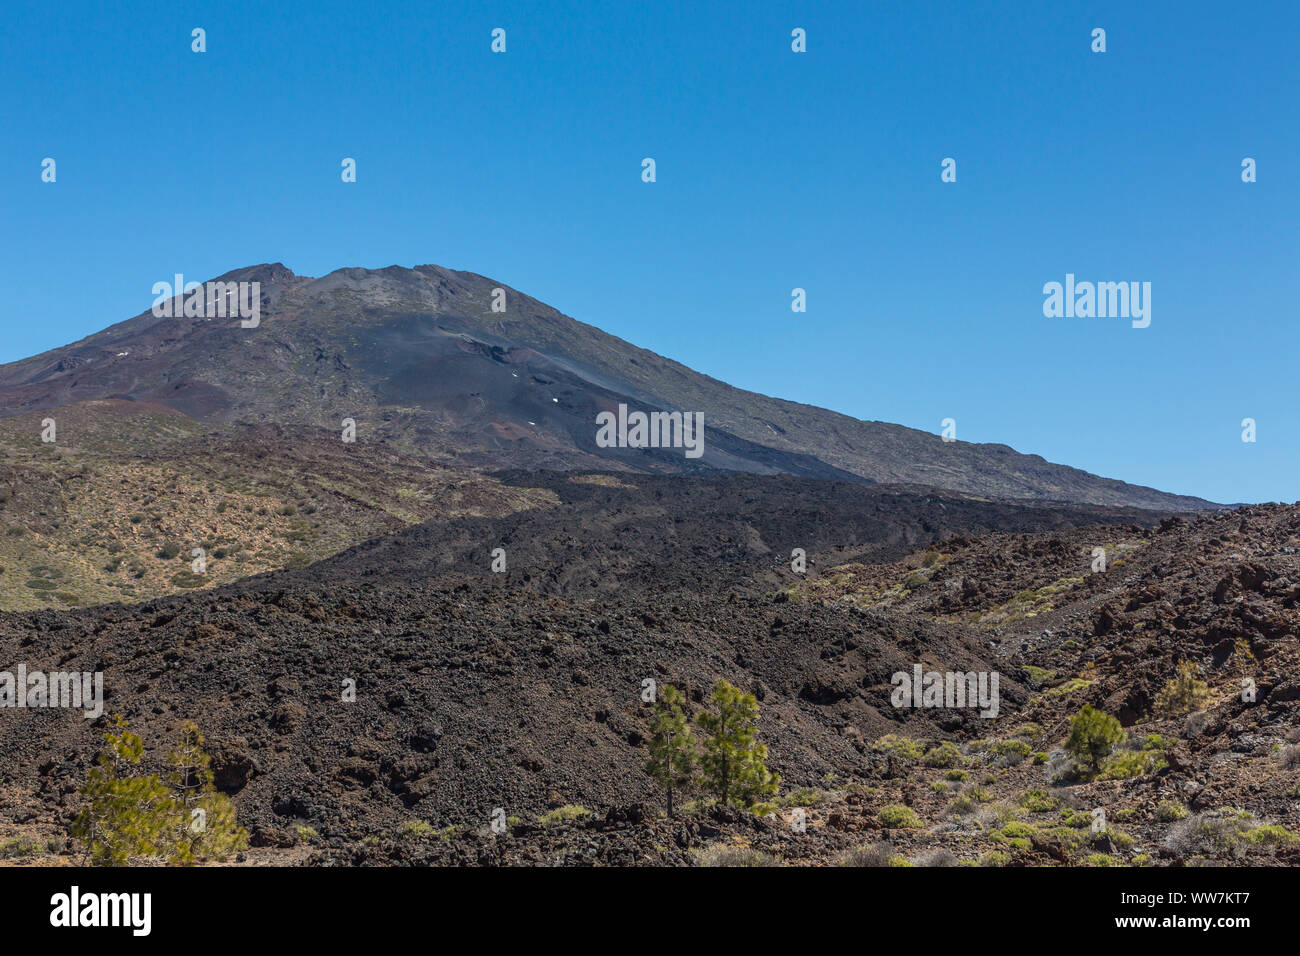 Volcano Pico Viejo, 3135 m, panorama, view from the View Point Las Narices del Teide, Teide National Park, UNESCO World Heritage - natural site, Tenerife, Canary Islands, Spain, Europe Stock Photo